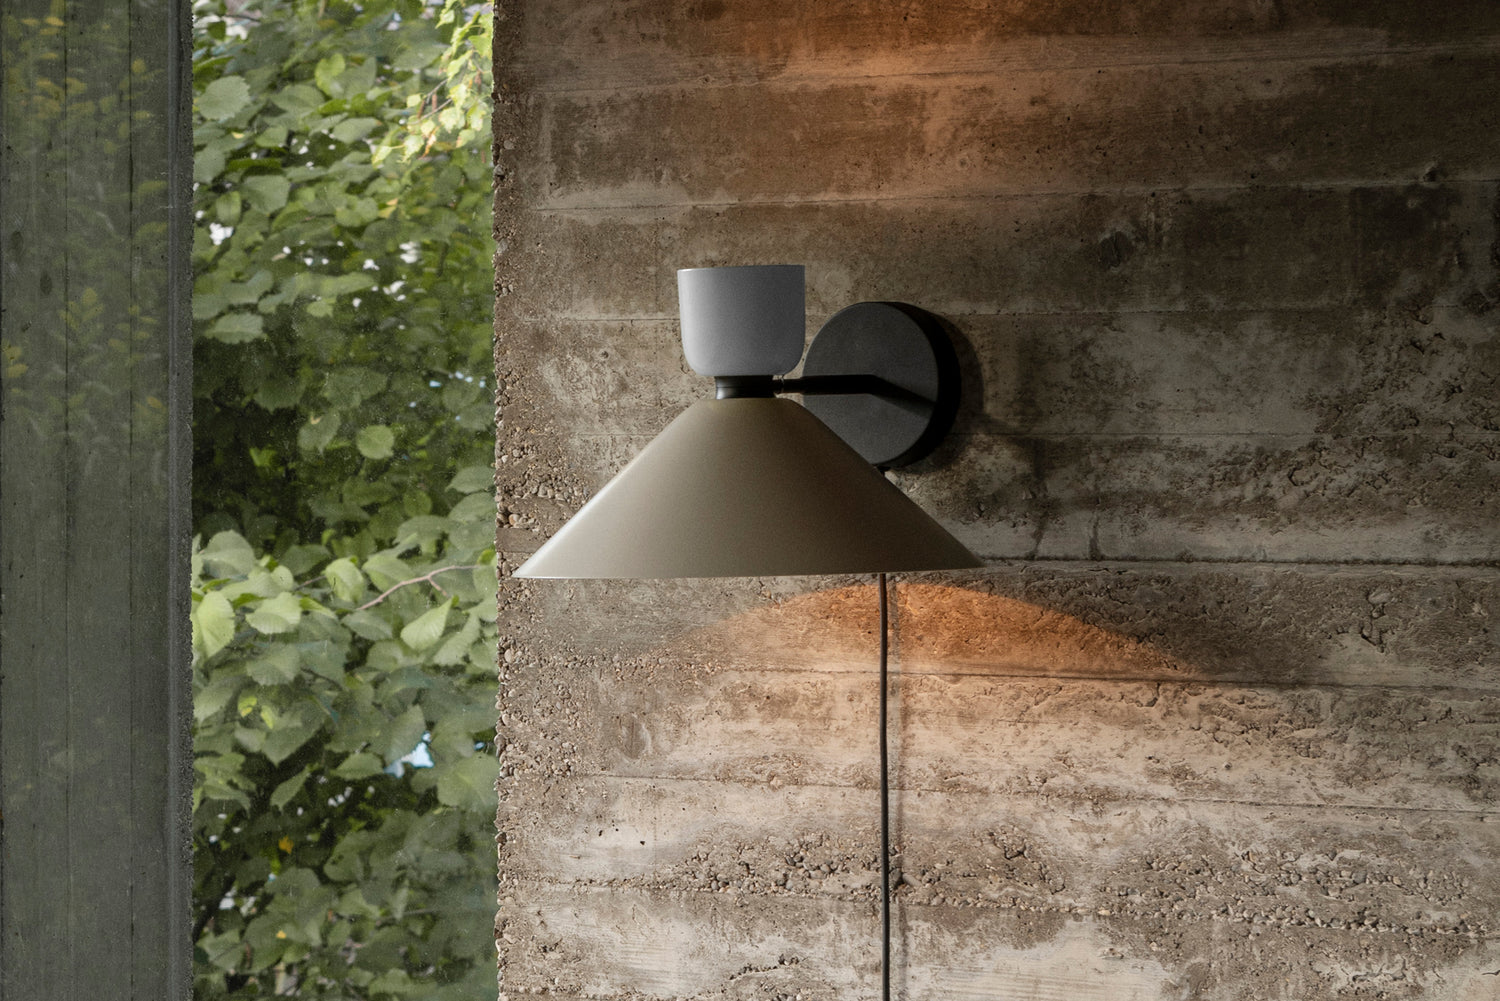 An image showing the Alphabeta Wall Light + Cable lit and mounted on a gray stone wall.